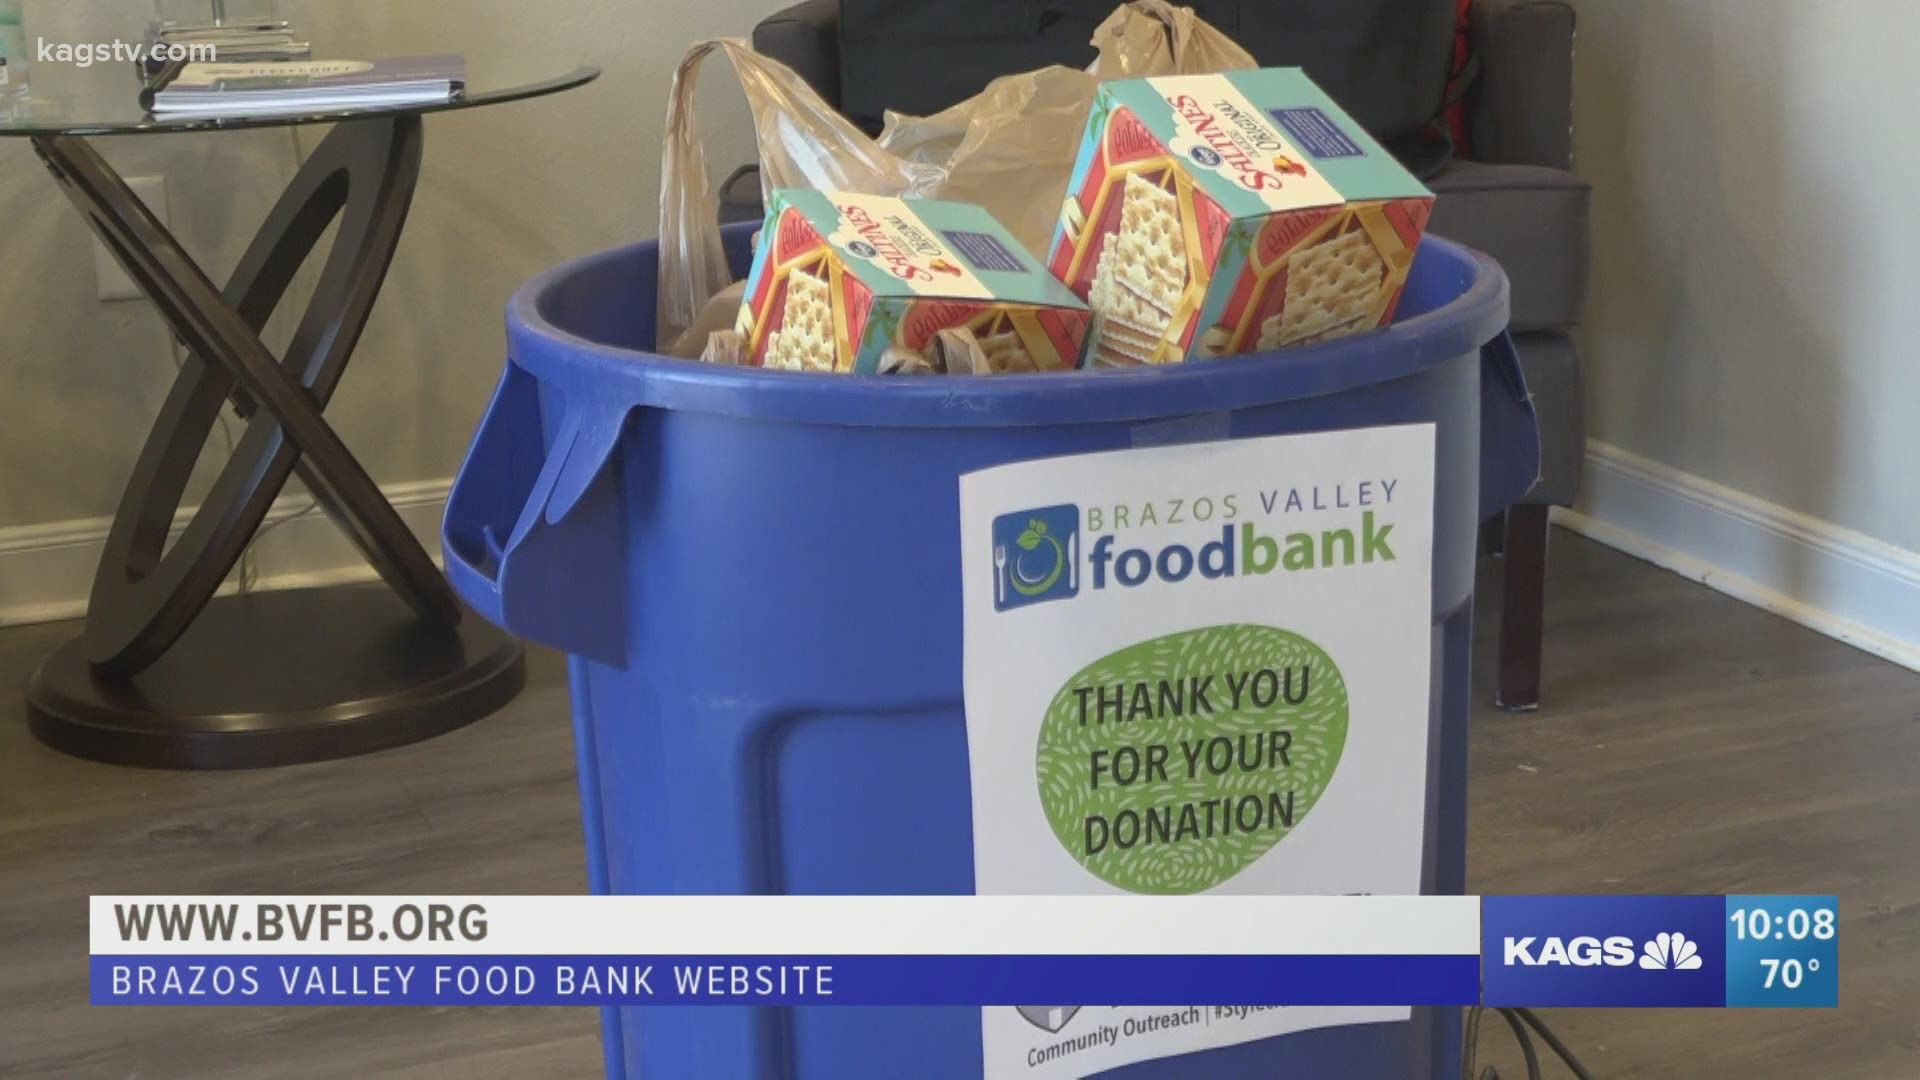 StyleCraft created 7 food drives that will be open for a few more days. The CEO and owner Randy French got his team together to support the Brazos Valley Food Bank.